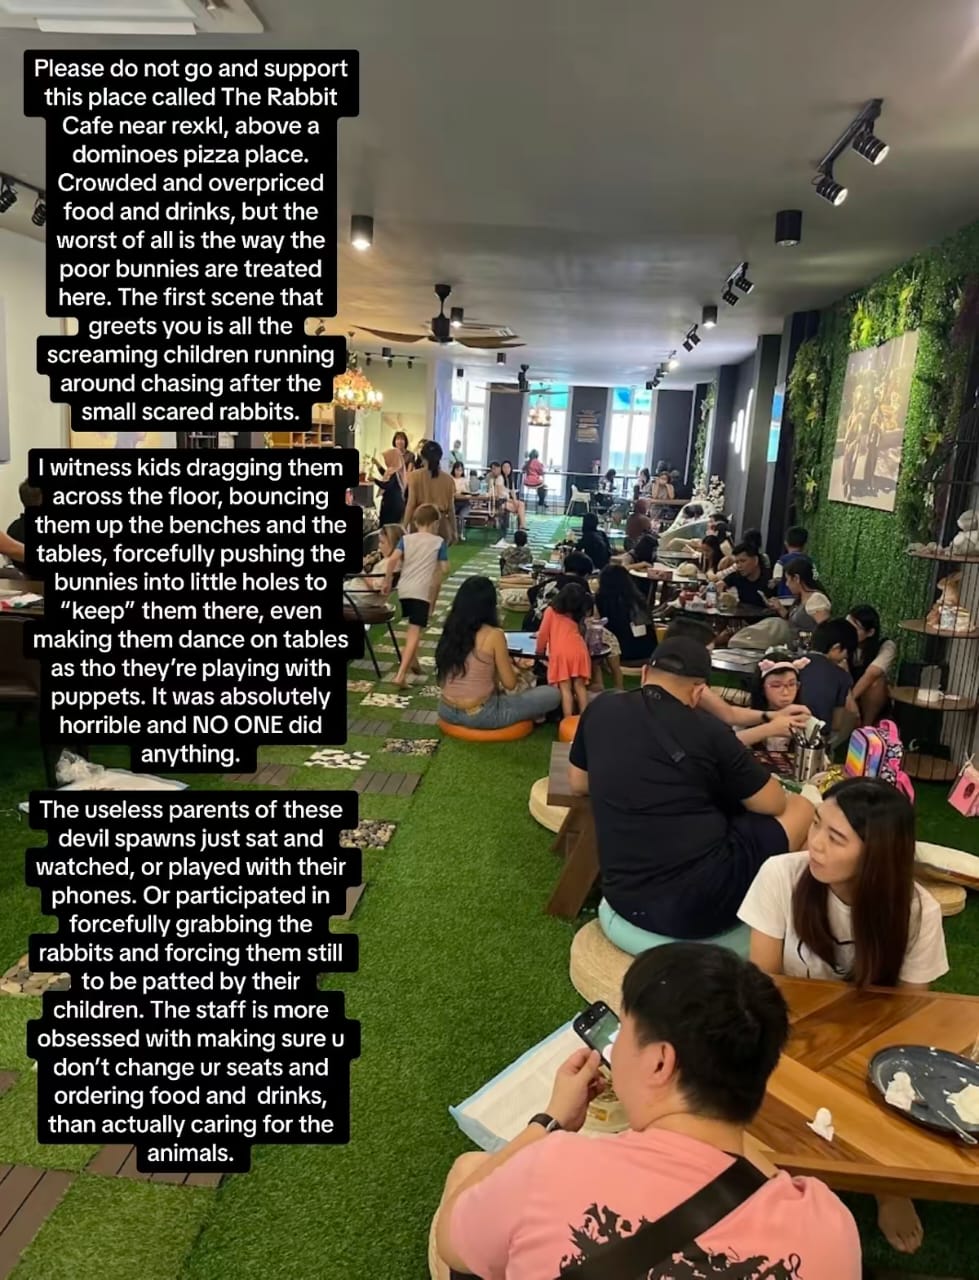 Msian complains about the mistreatment of animals at a pet-friendly cafe